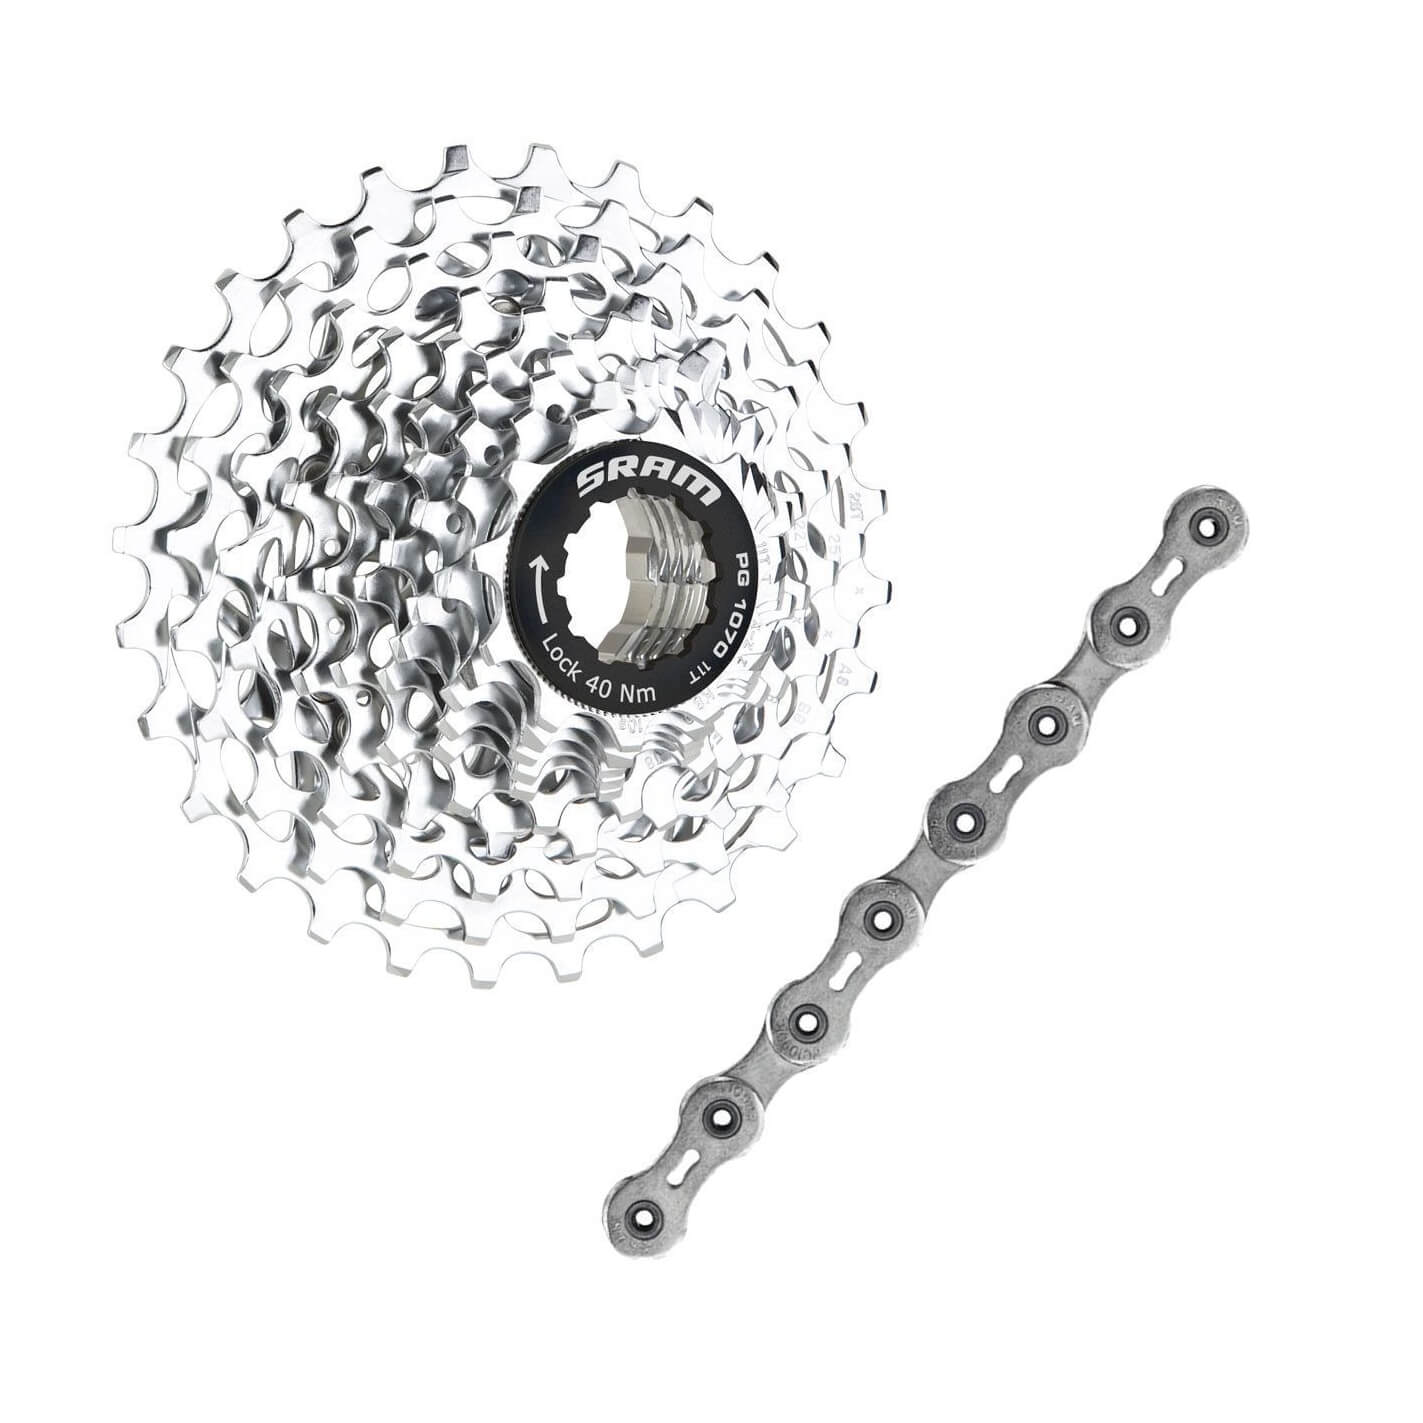 Sram PG-1070 Cassette with PC-1091R 10 Speed Chain Kit